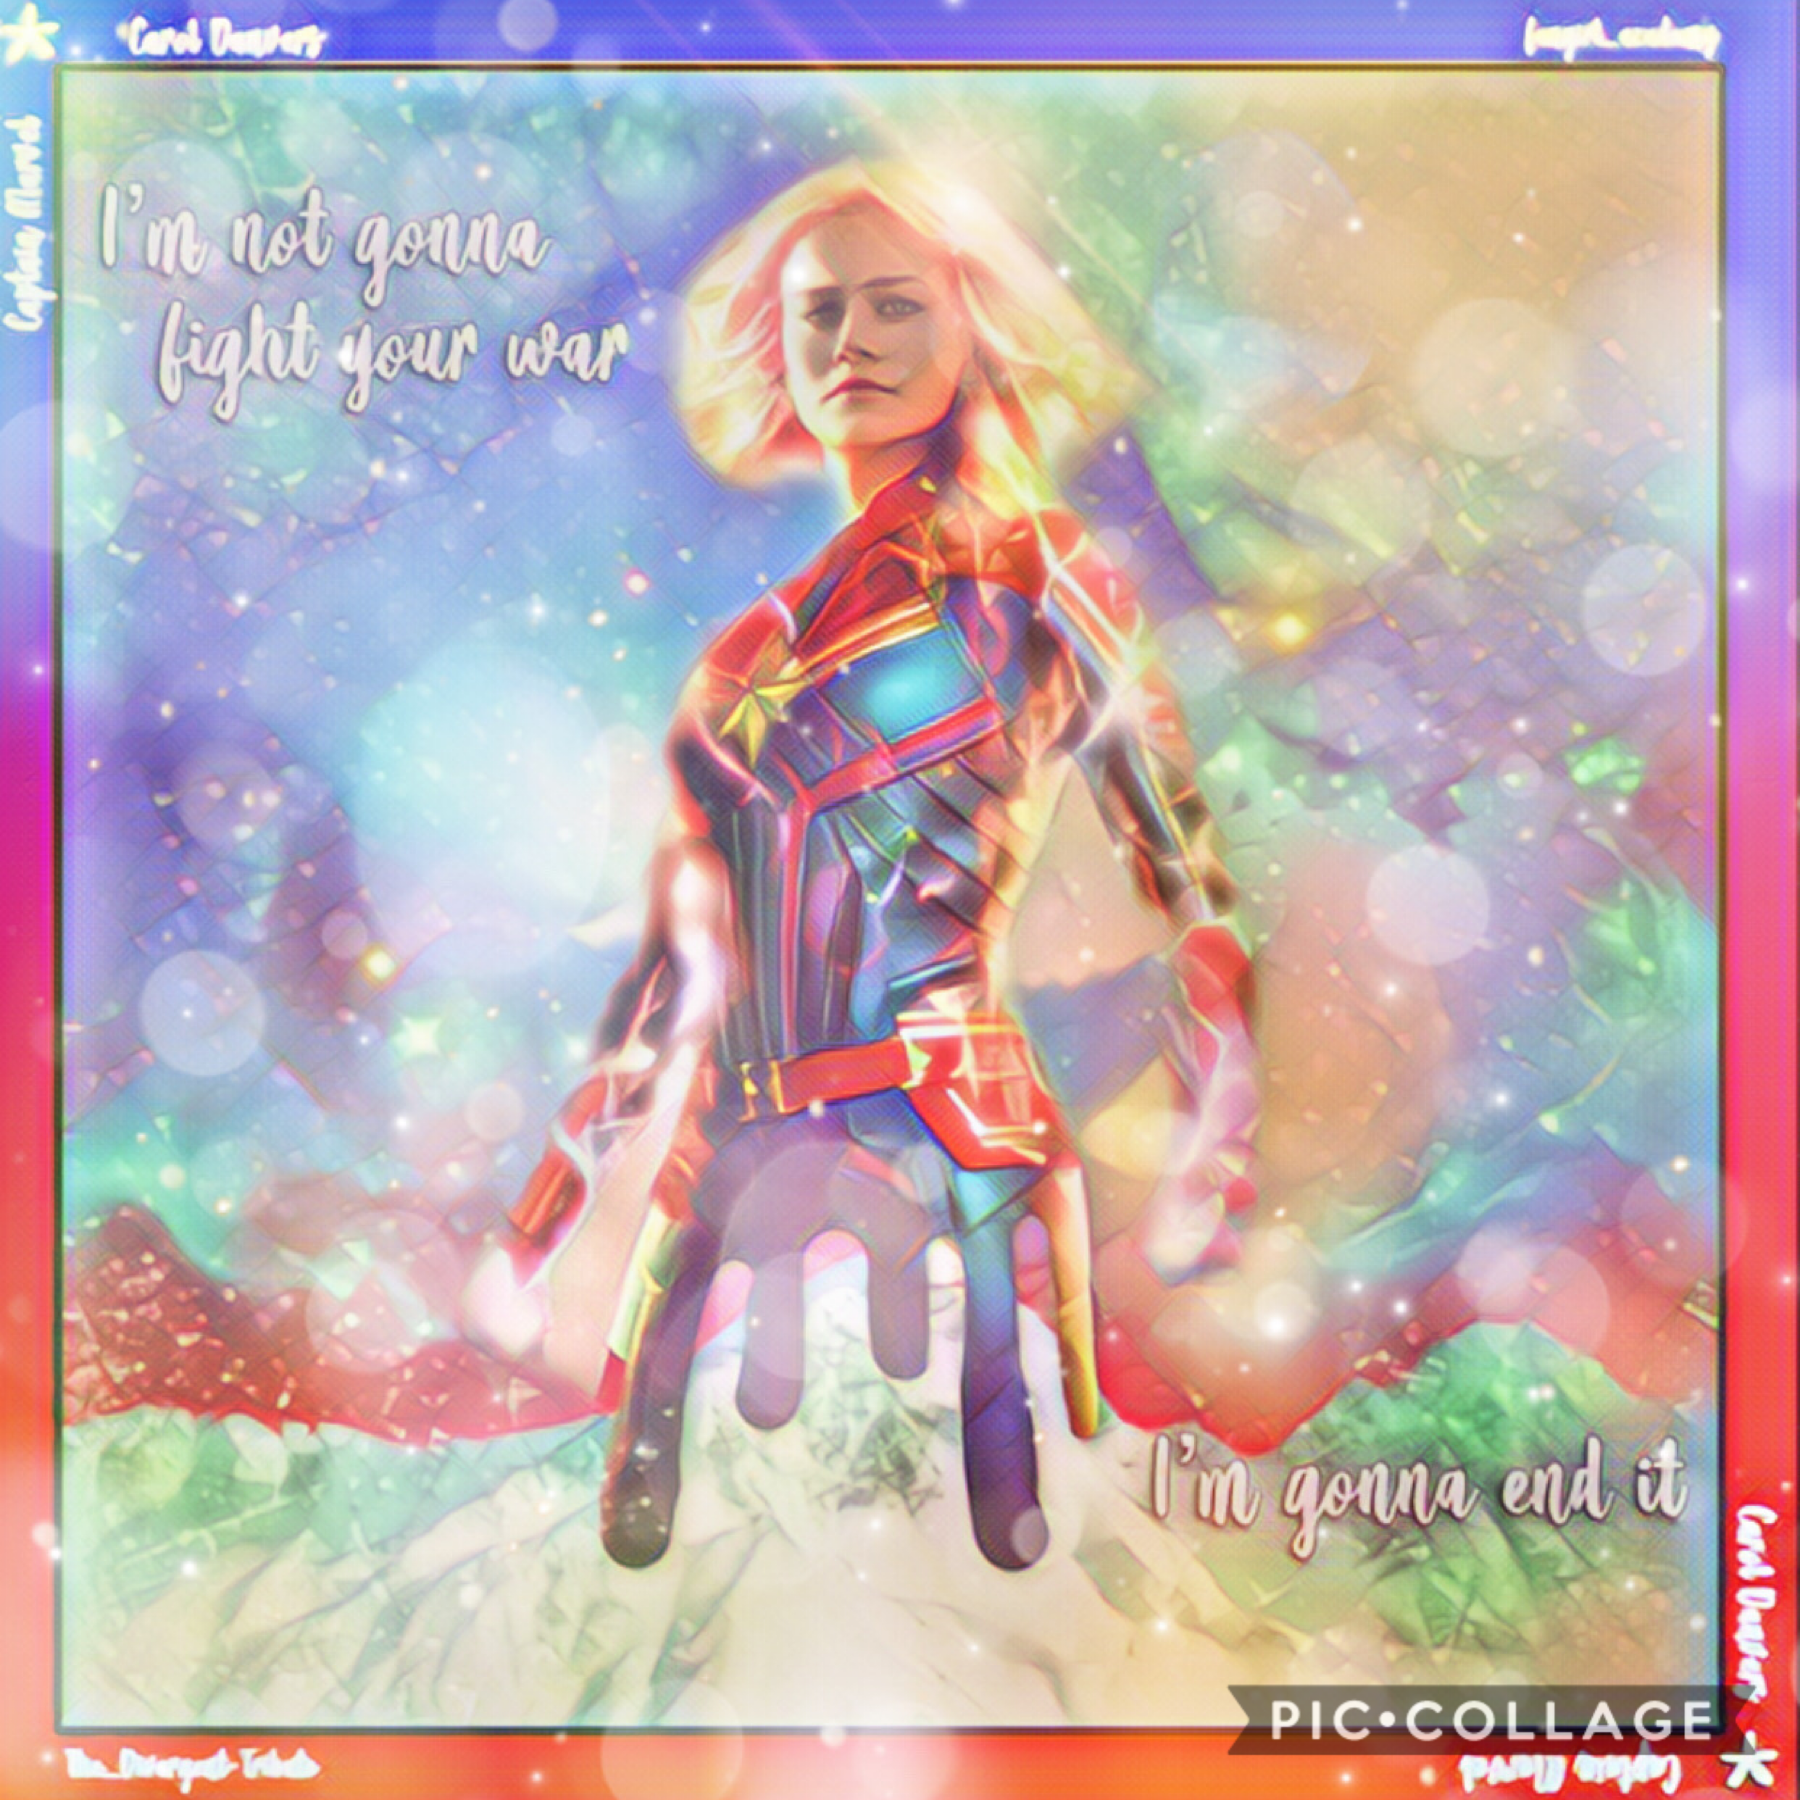 OMG Y’ALL! This is for @-Peters_Second_Star-‘s Marvel Games! The theme was inspiration, so this is inspired by @dontsmileatme- ! 

✨Rate /10?✨